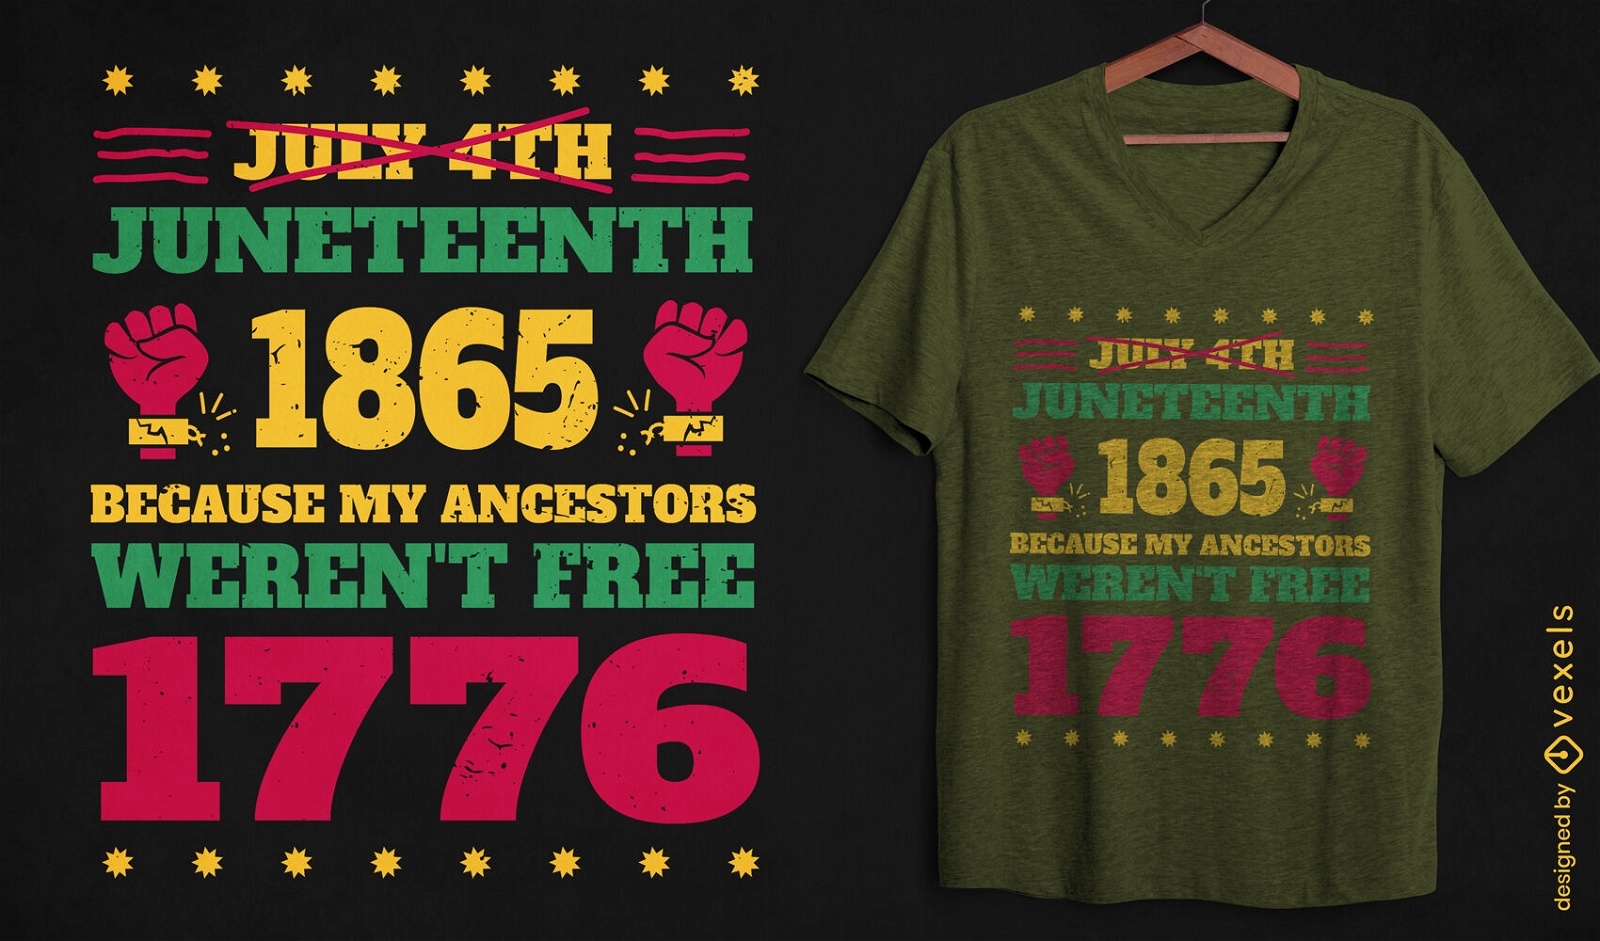 Juneteenth holiday quote t-shirt design